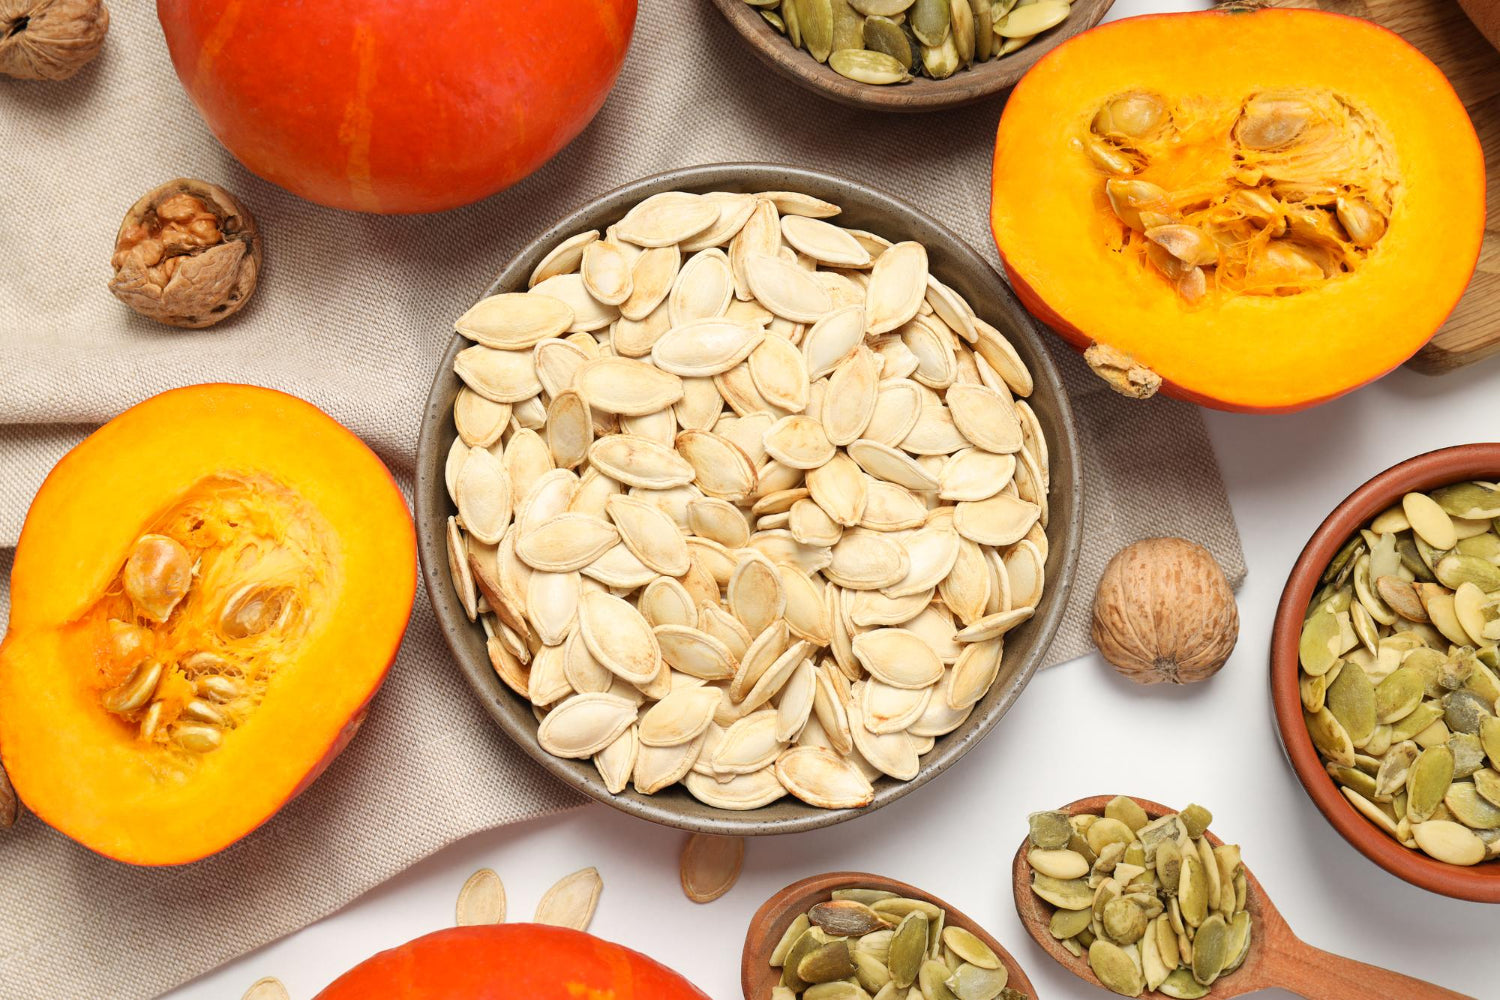 Pumpkin Seeds: A Nutrient-Packed Superfood for Your Snack Game